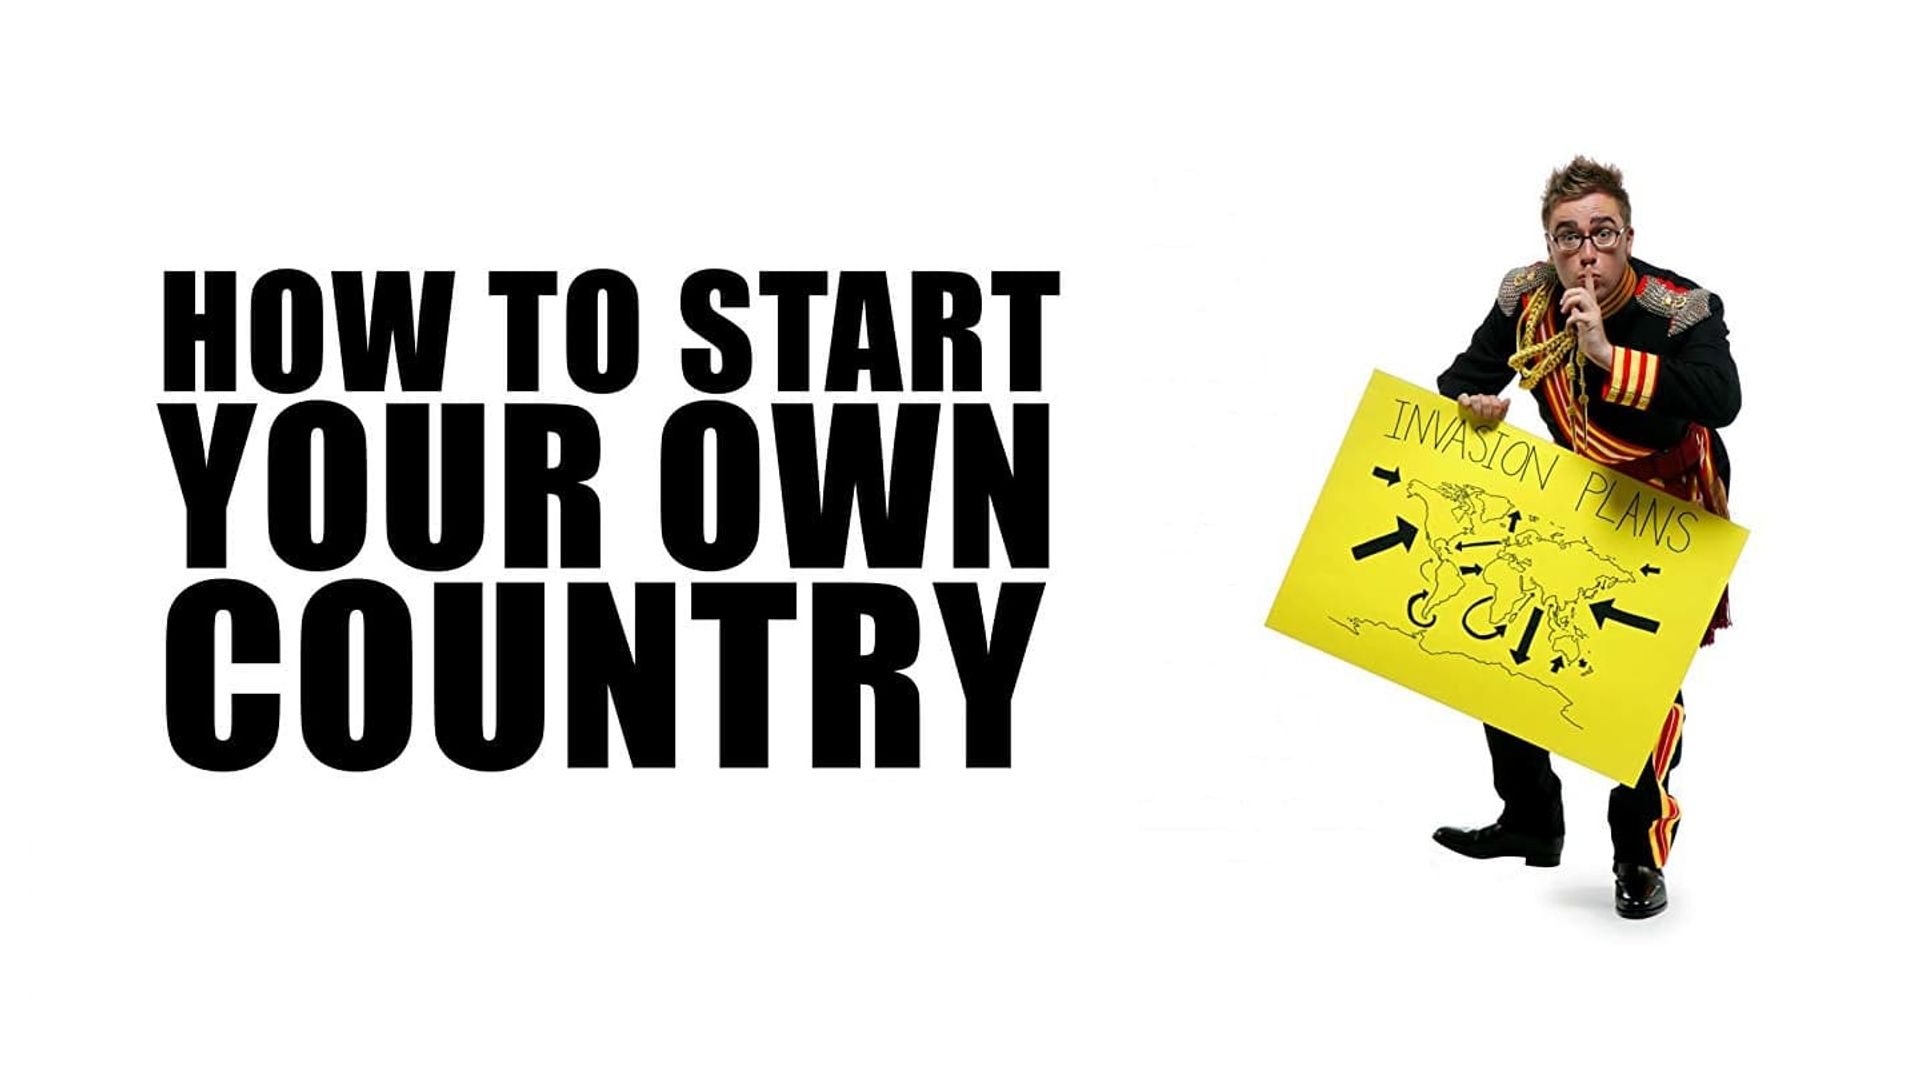 How to Start Your Own Country background